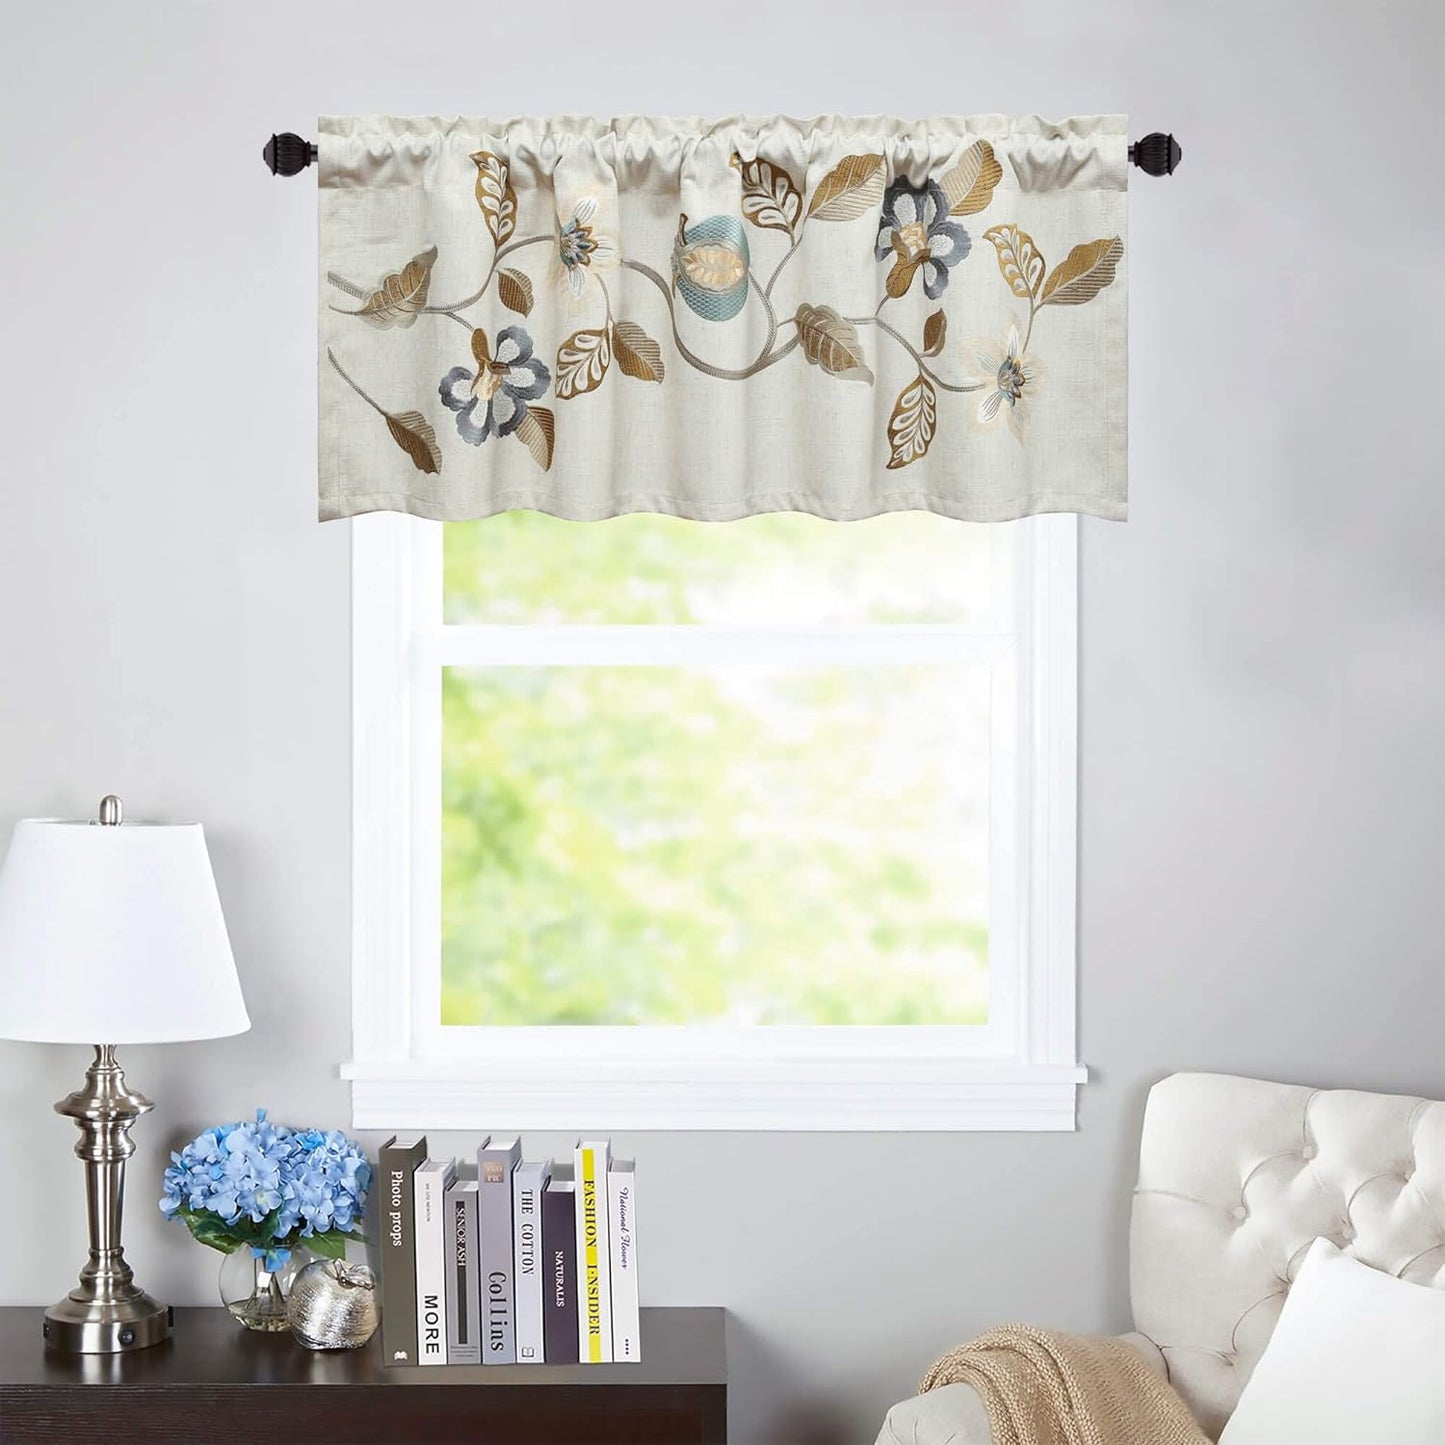 VOGOL Linen Valances for Living Room, Vintage Floral Valance for Bedroom, Rod Pocket Valance Curtains for Dining Room, 52''W X 18''L, One Panel, Flower Embroidery  YouYee Ys009  